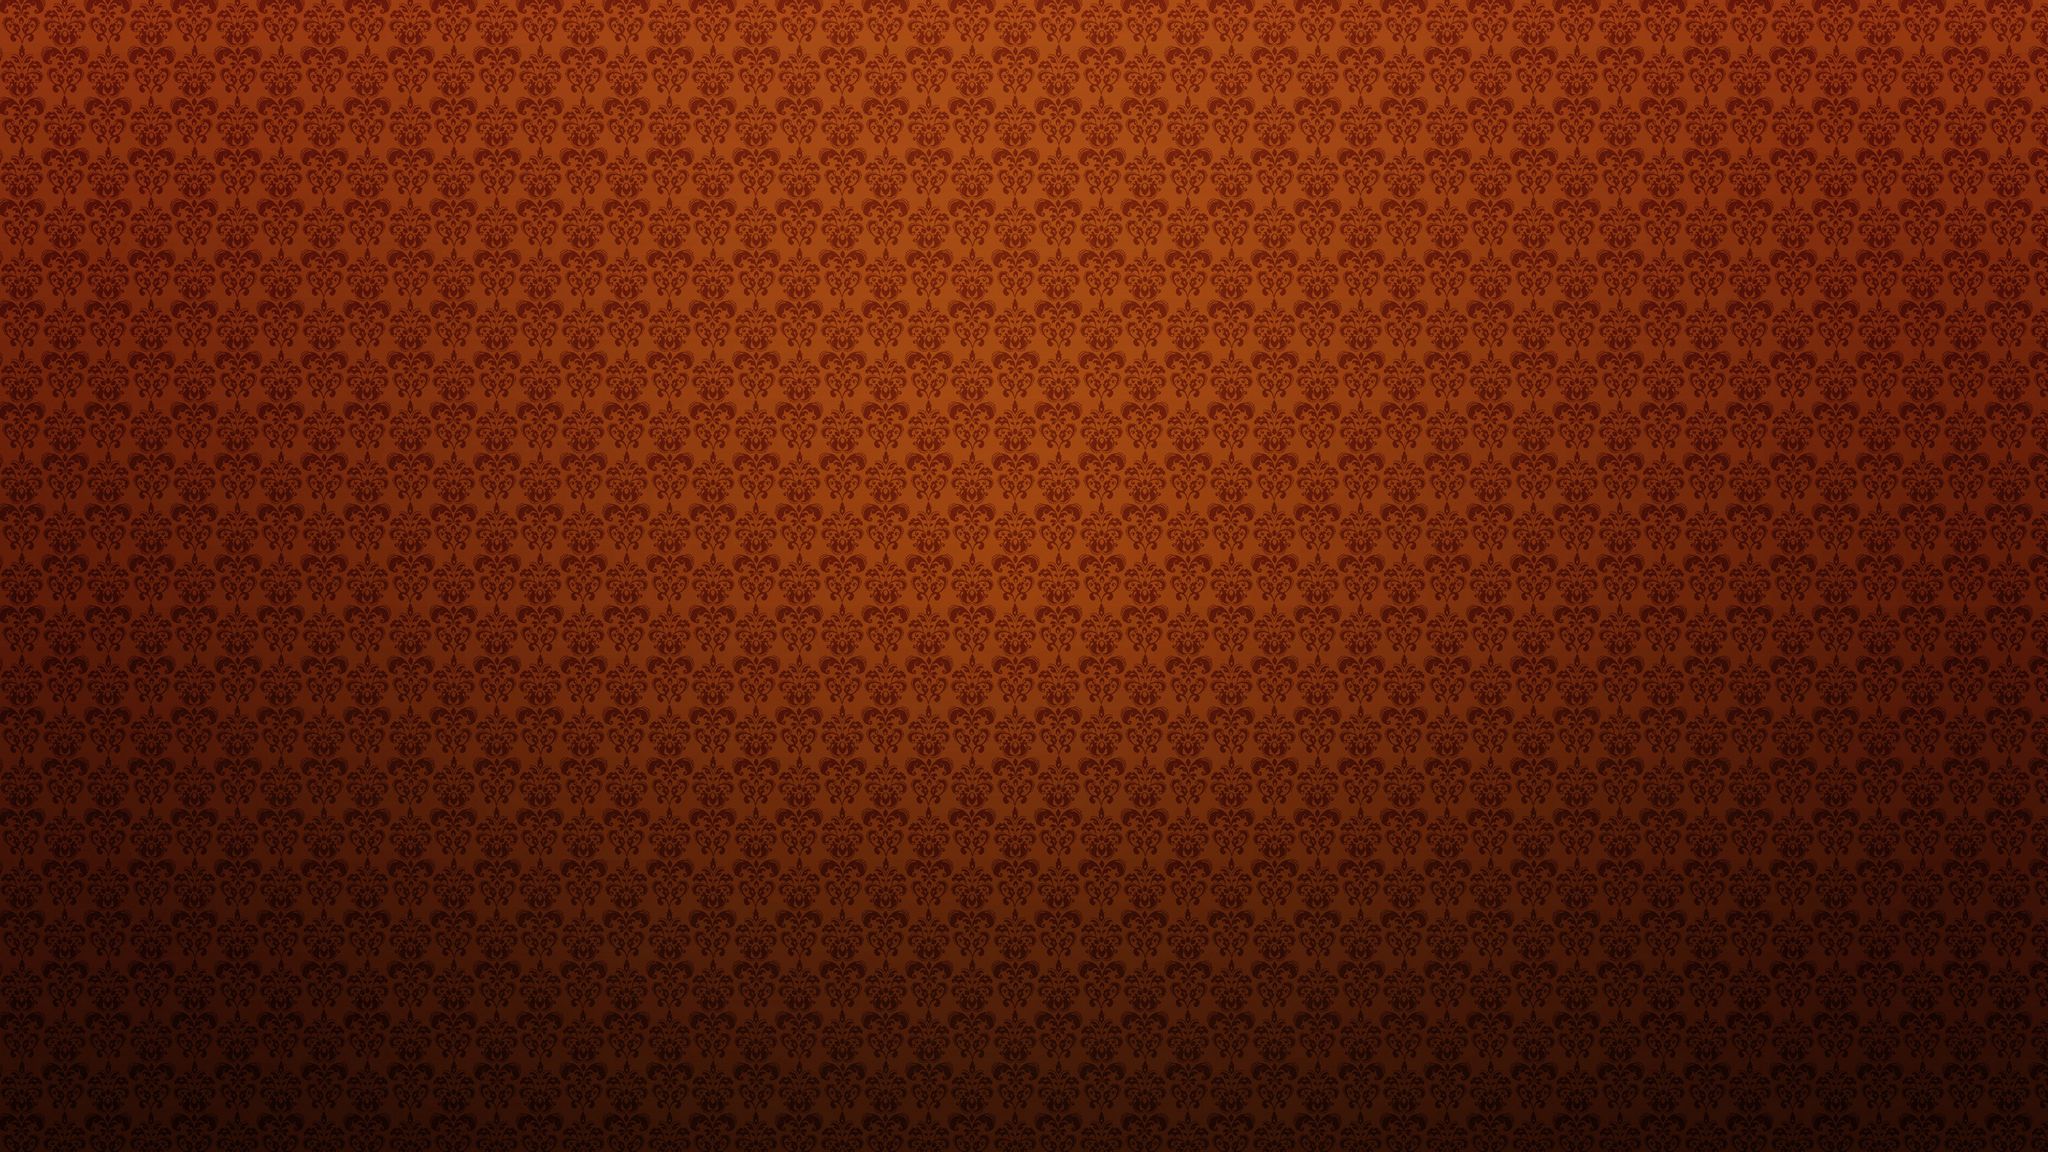 Download wallpaper 2048x1152 patterns, light, colorful, texture ...